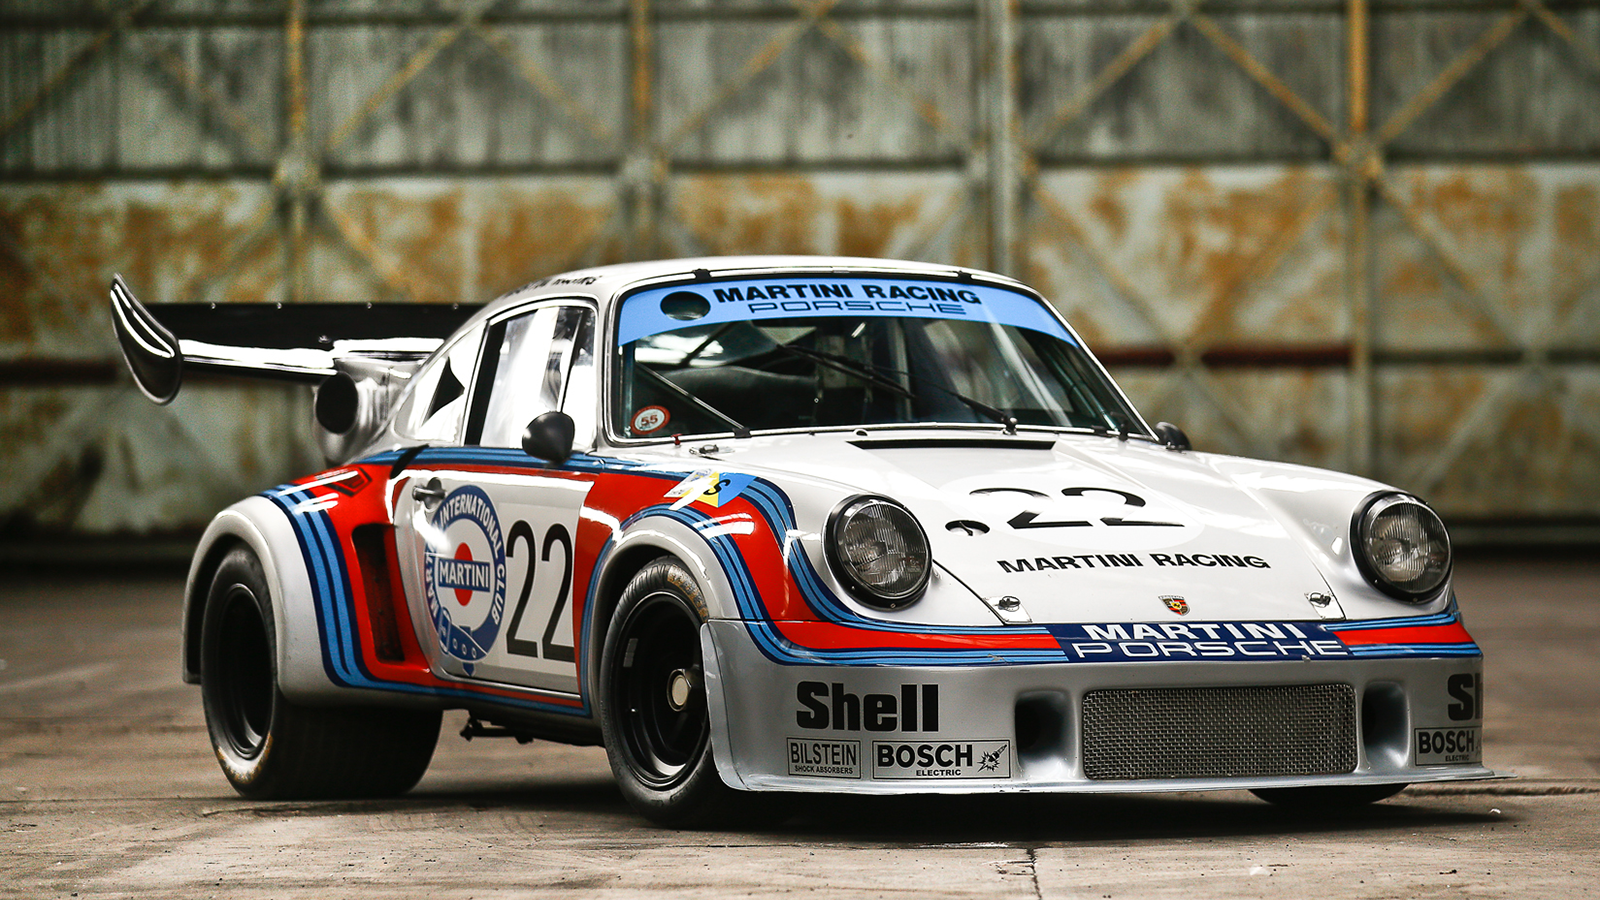 This Porsche starred at Le Mans – and now it's on sale for $6m | Classic &  Sports Car